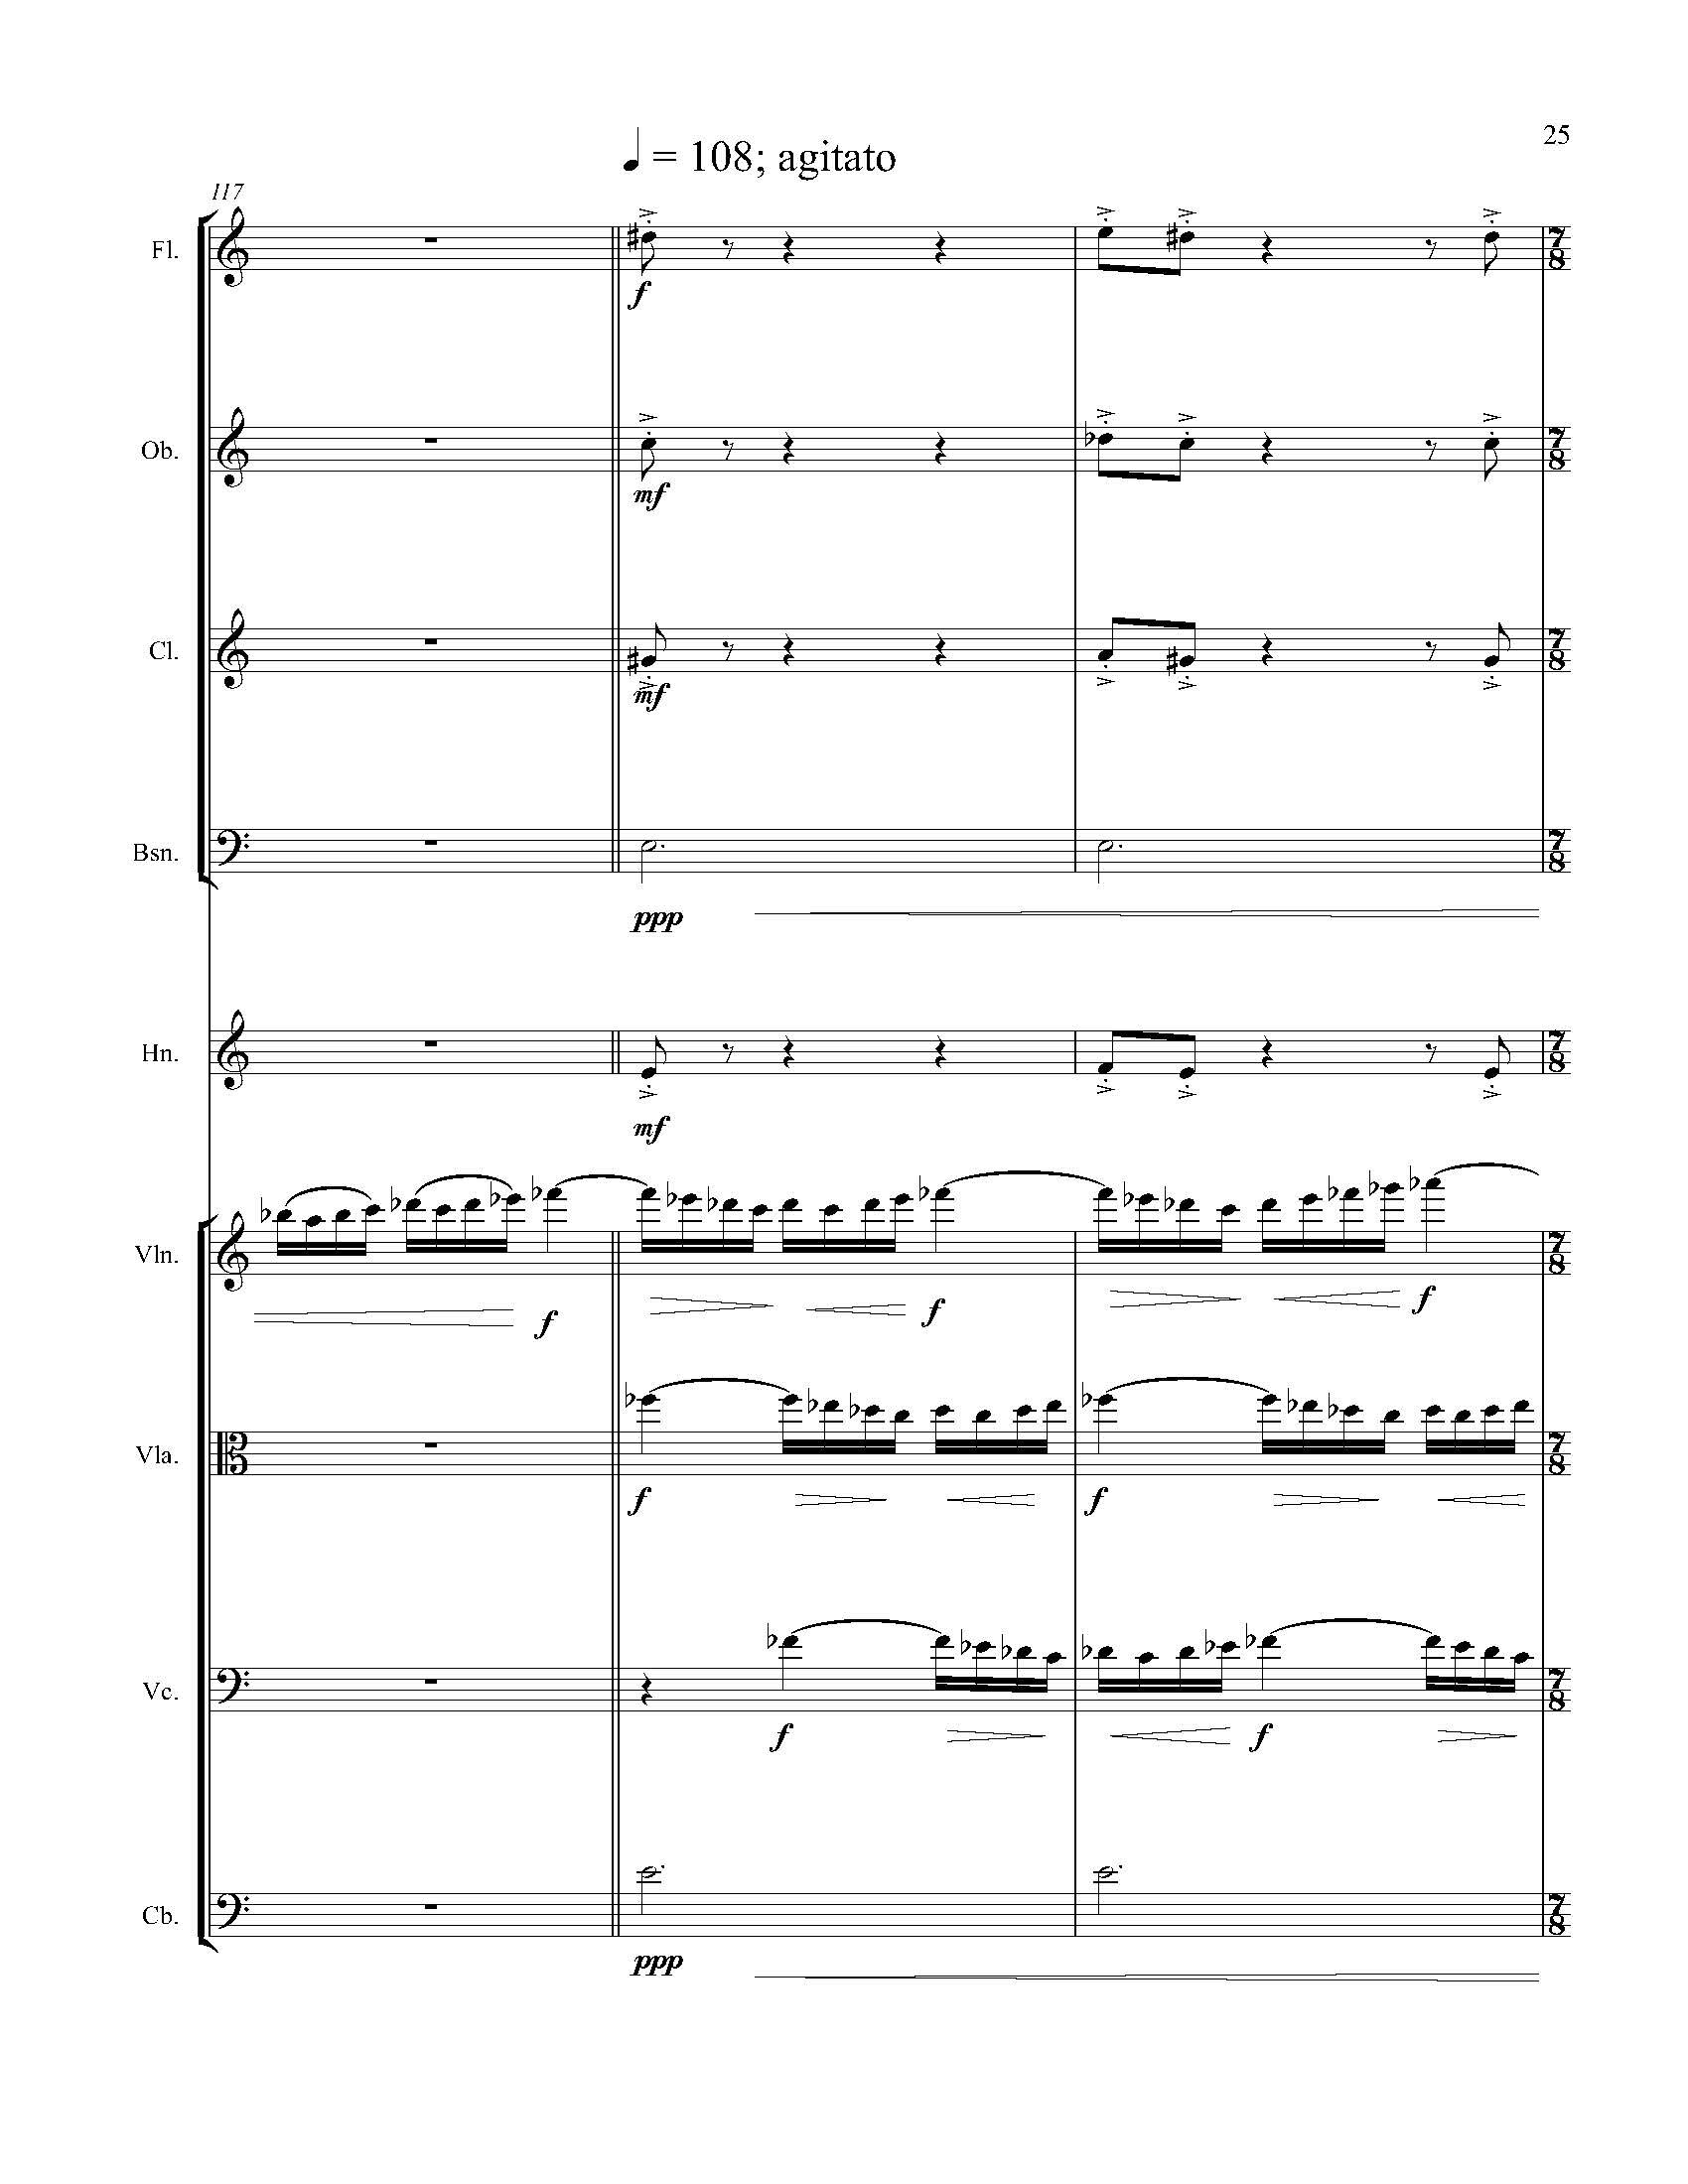 In Search of a Bird - Complete Score_Page_31.jpg